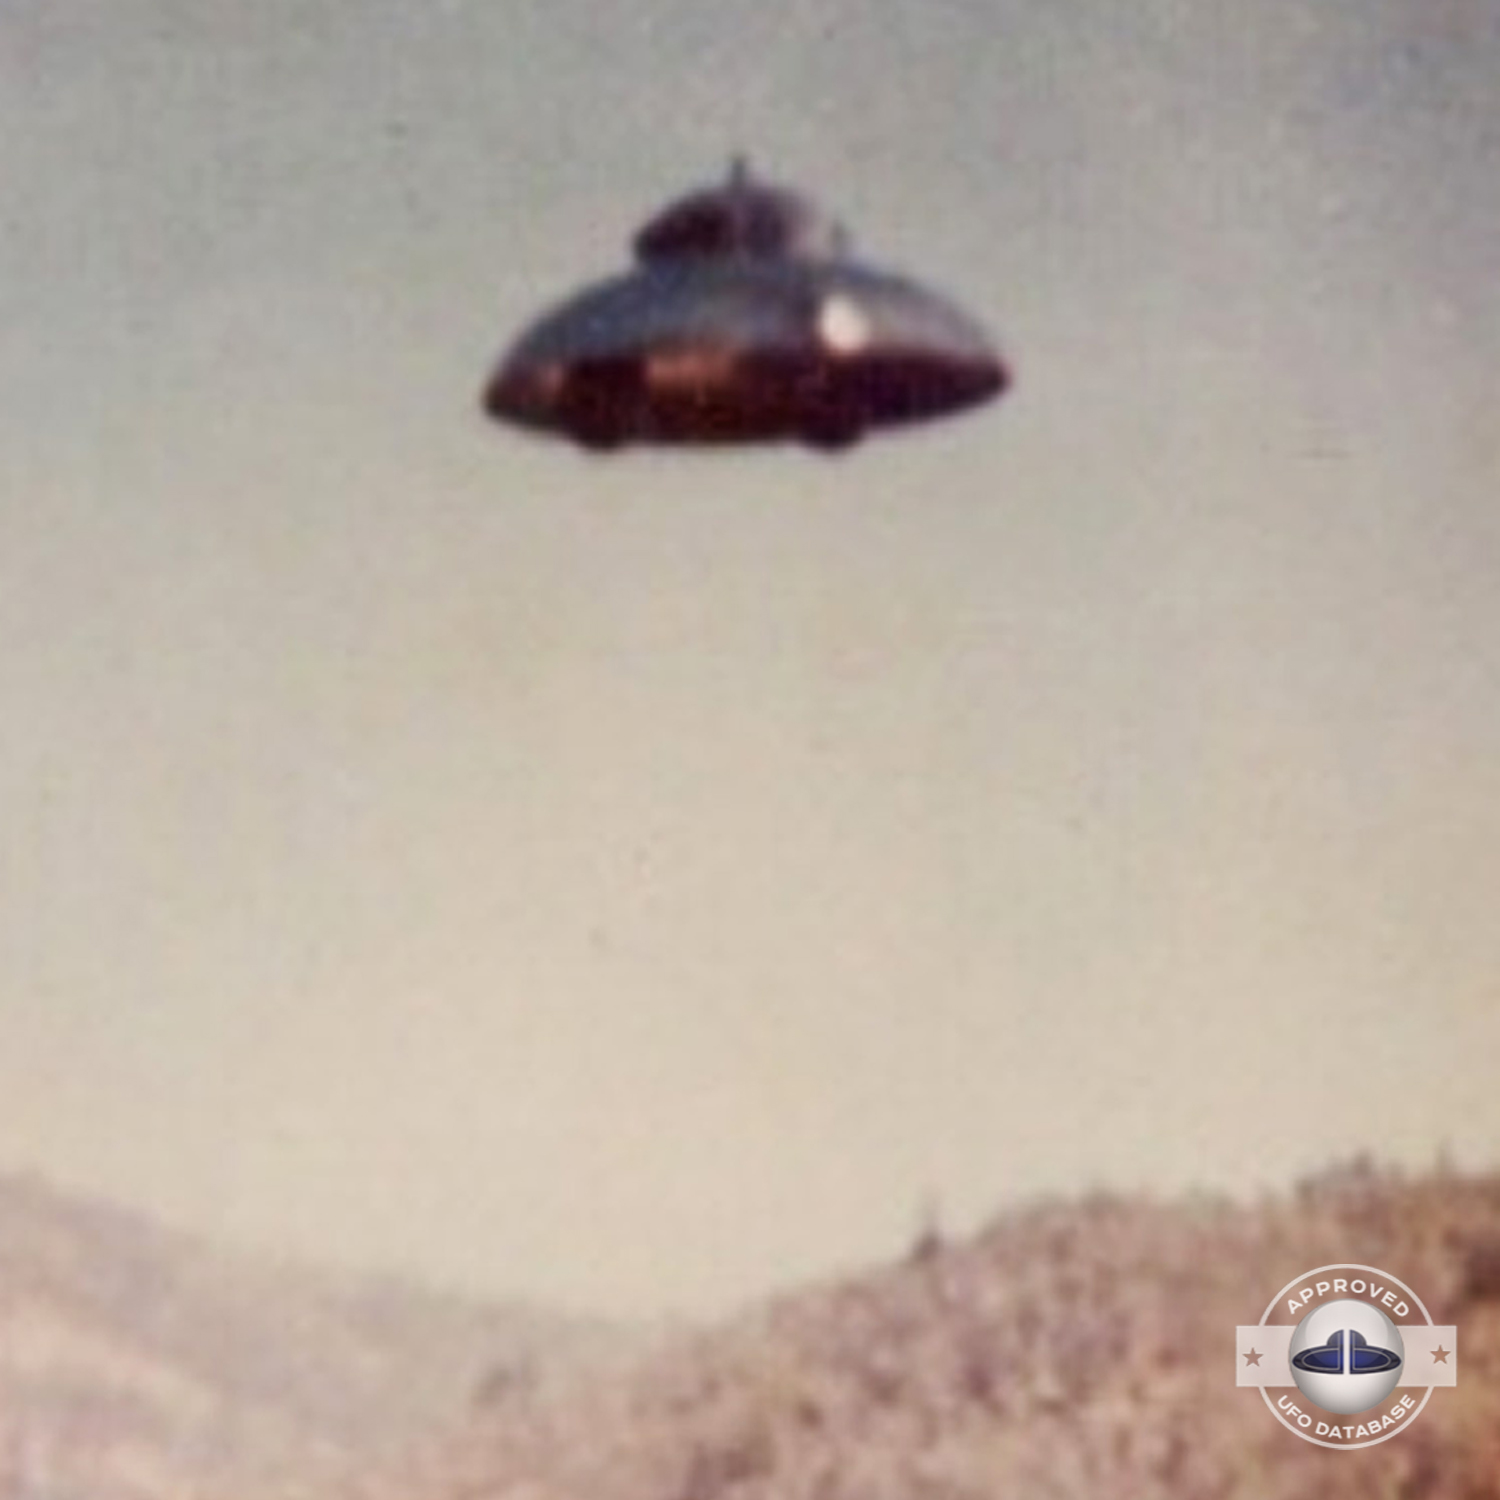 This UFO picture has been in several reports and controversies, 1970s UFO Picture #138-4